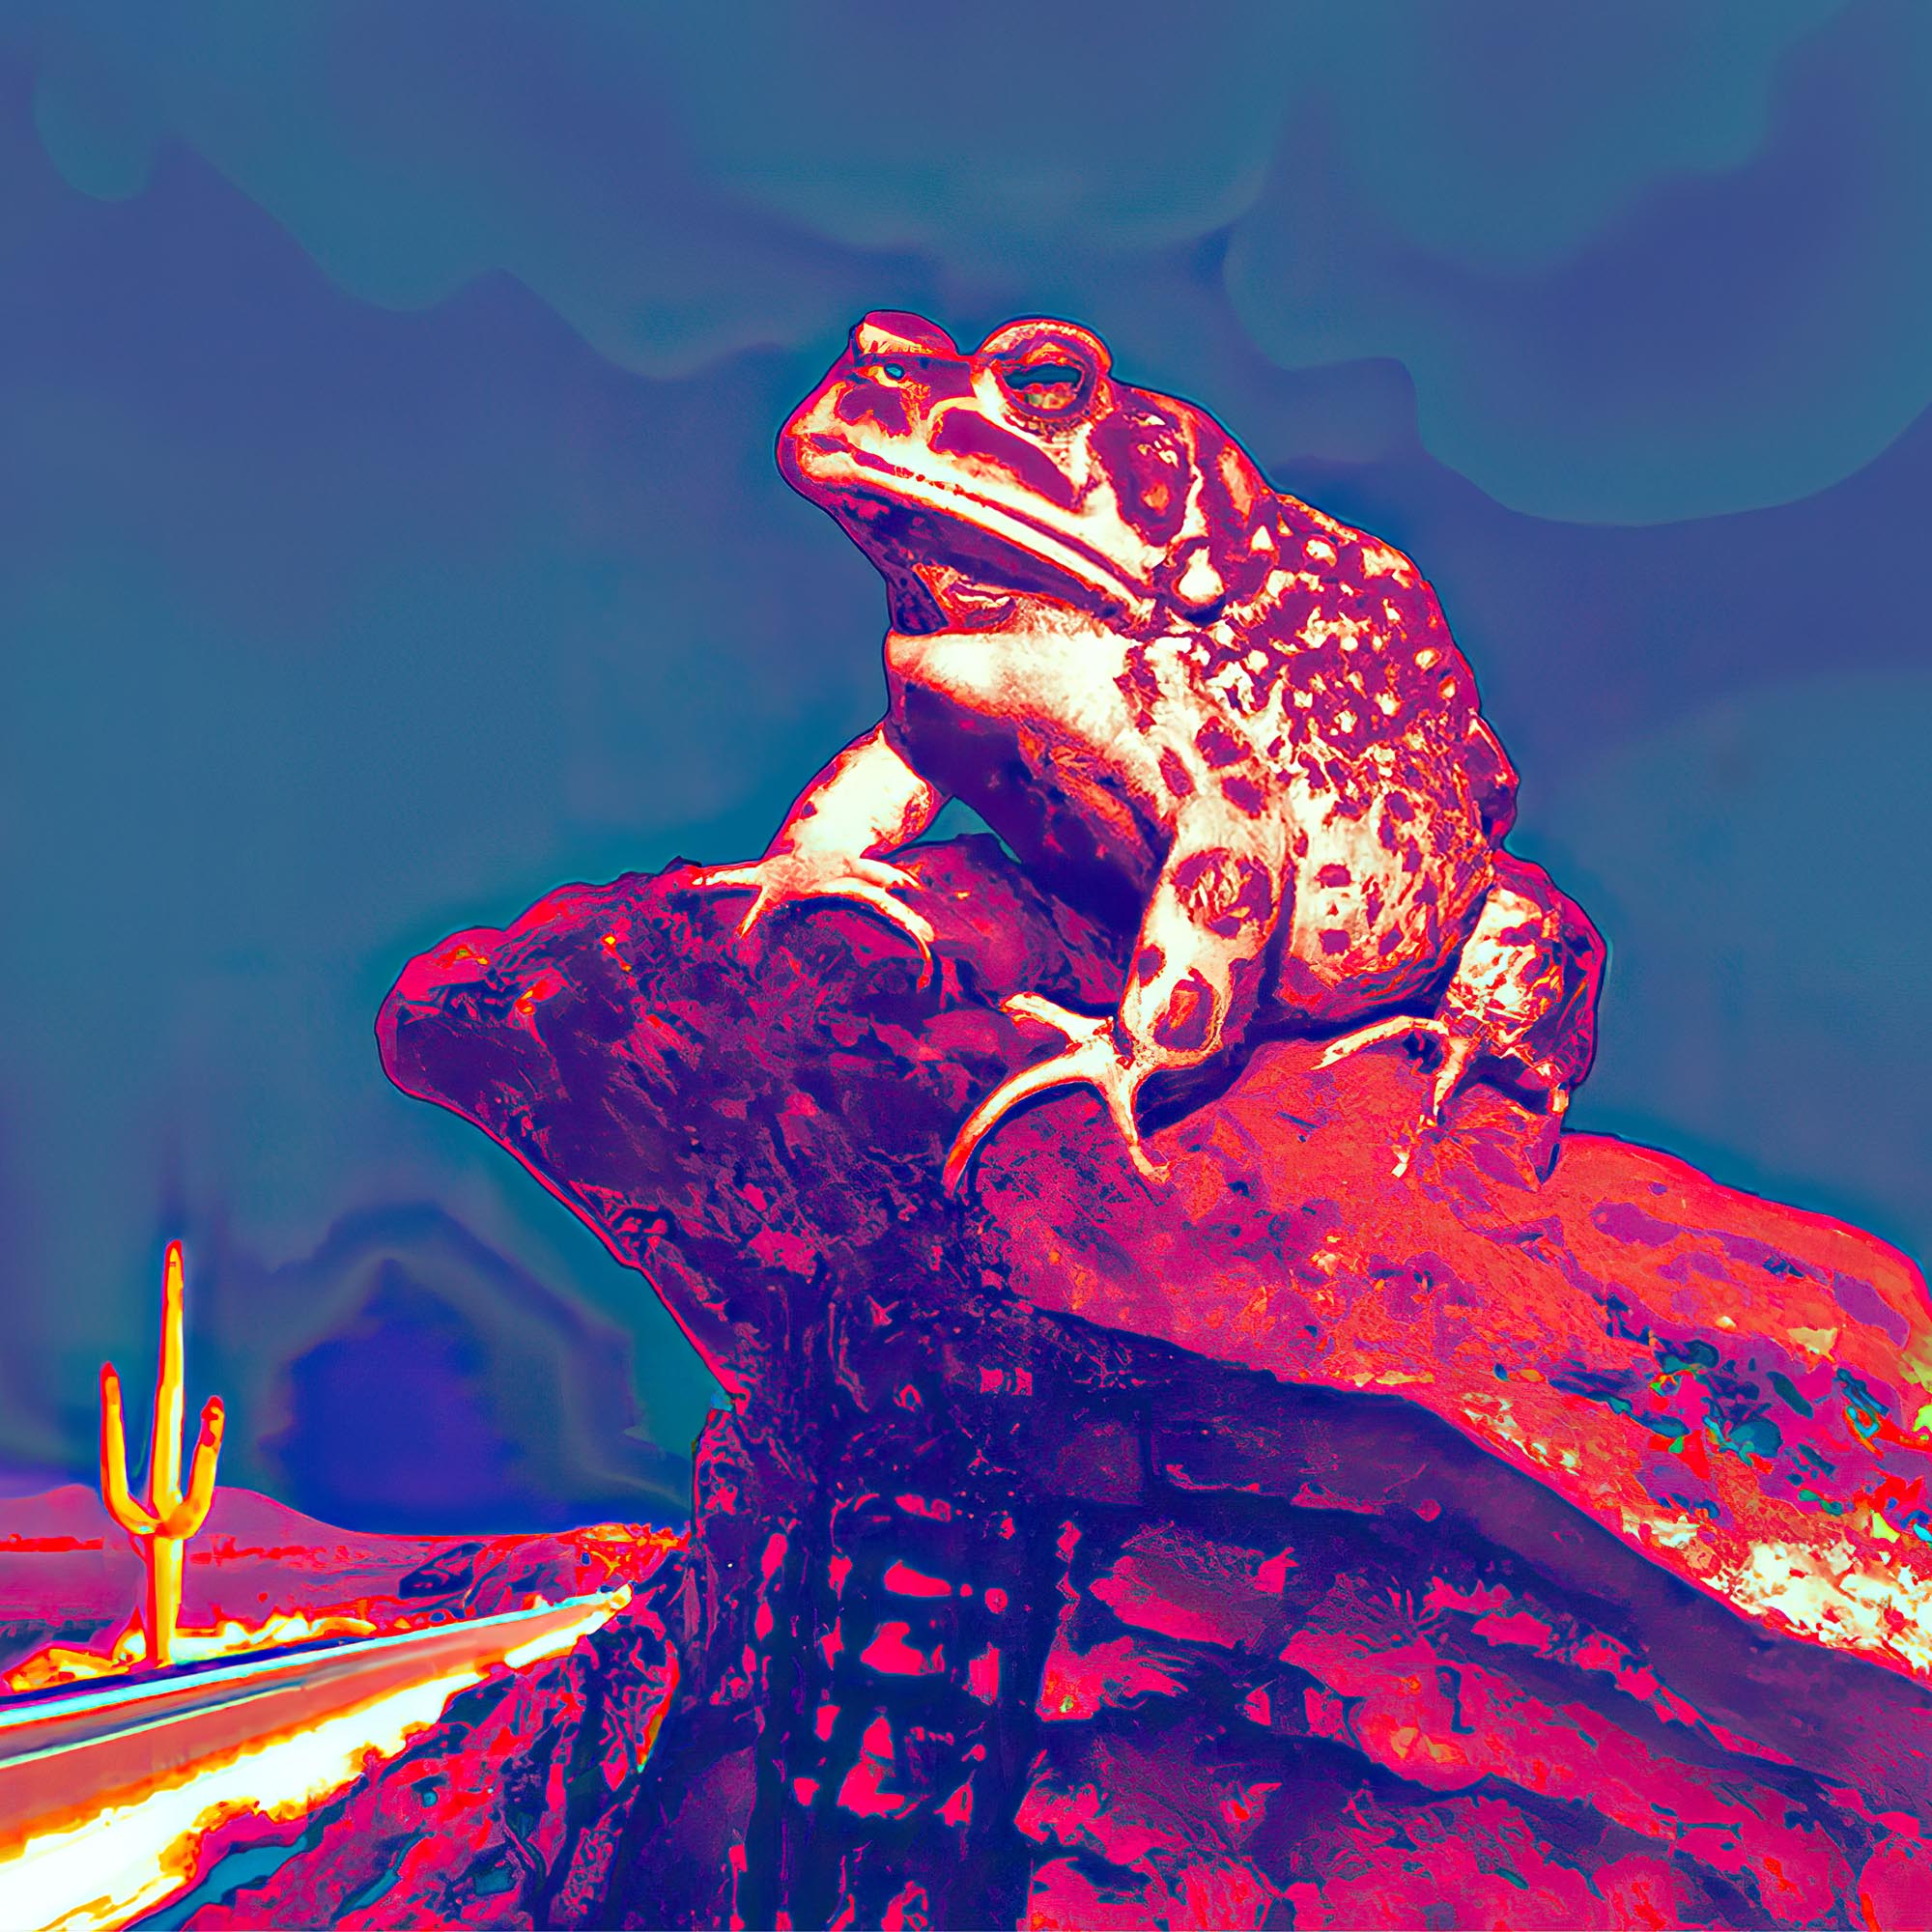 T-shirt DMT Toad in the Sonoran Desert | Bufo Alvarius, DMT Psychedelic (Weed, 420) Digital Art T-Shirt